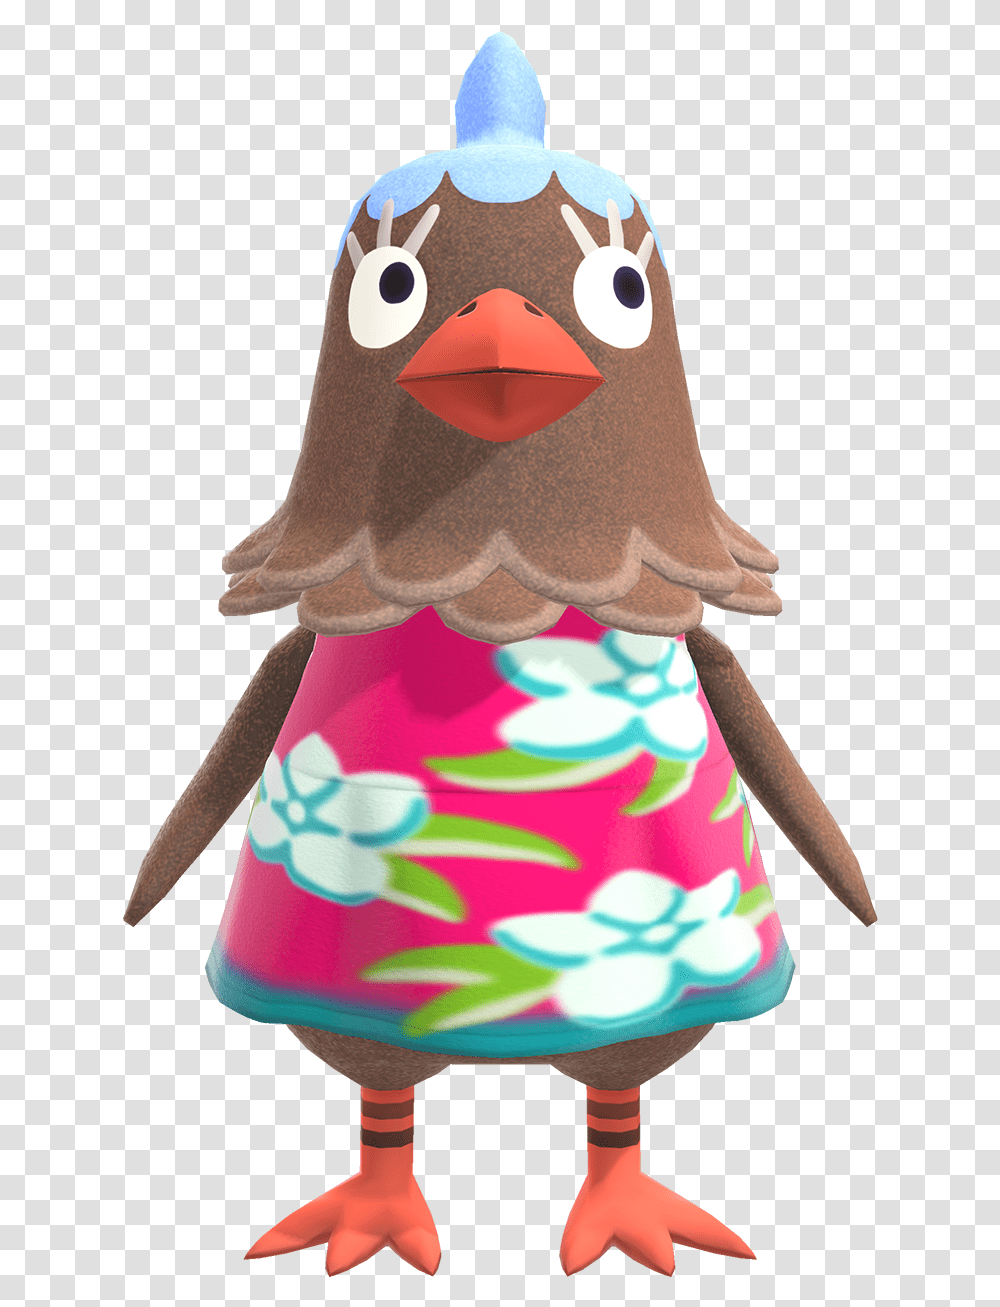 Plucky Animal Crossing Wiki Nookipedia Plucky Animal Crossing, Toy, Angry Birds Transparent Png